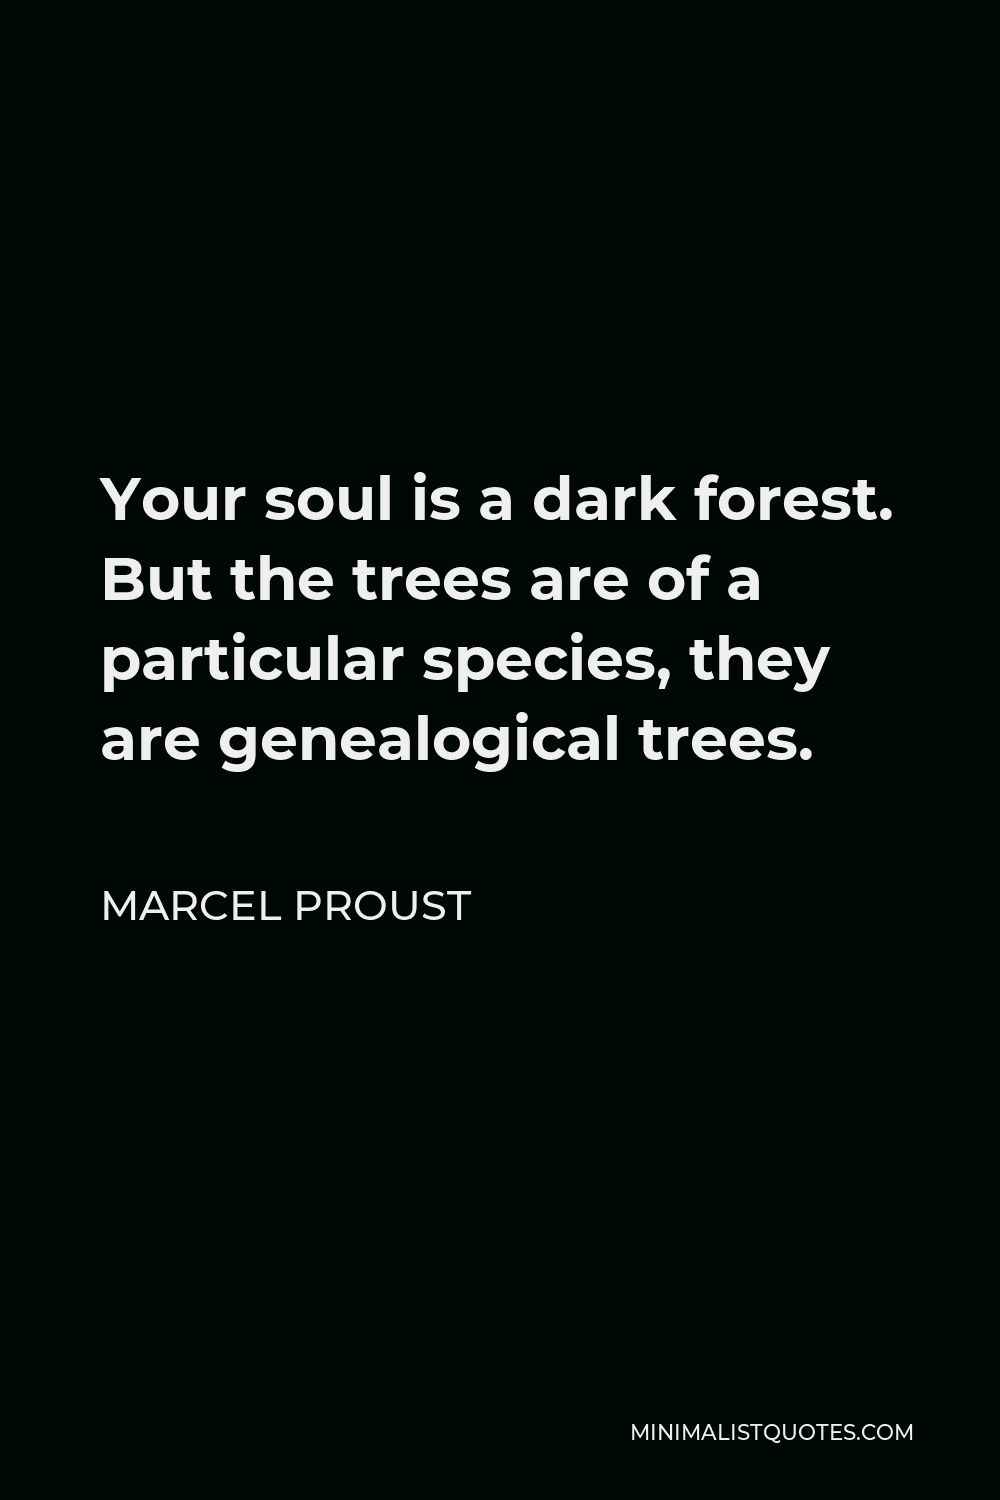 Marcel Proust Quote - Your soul is a dark forest. But the trees are of a particular species, they are genealogical trees.